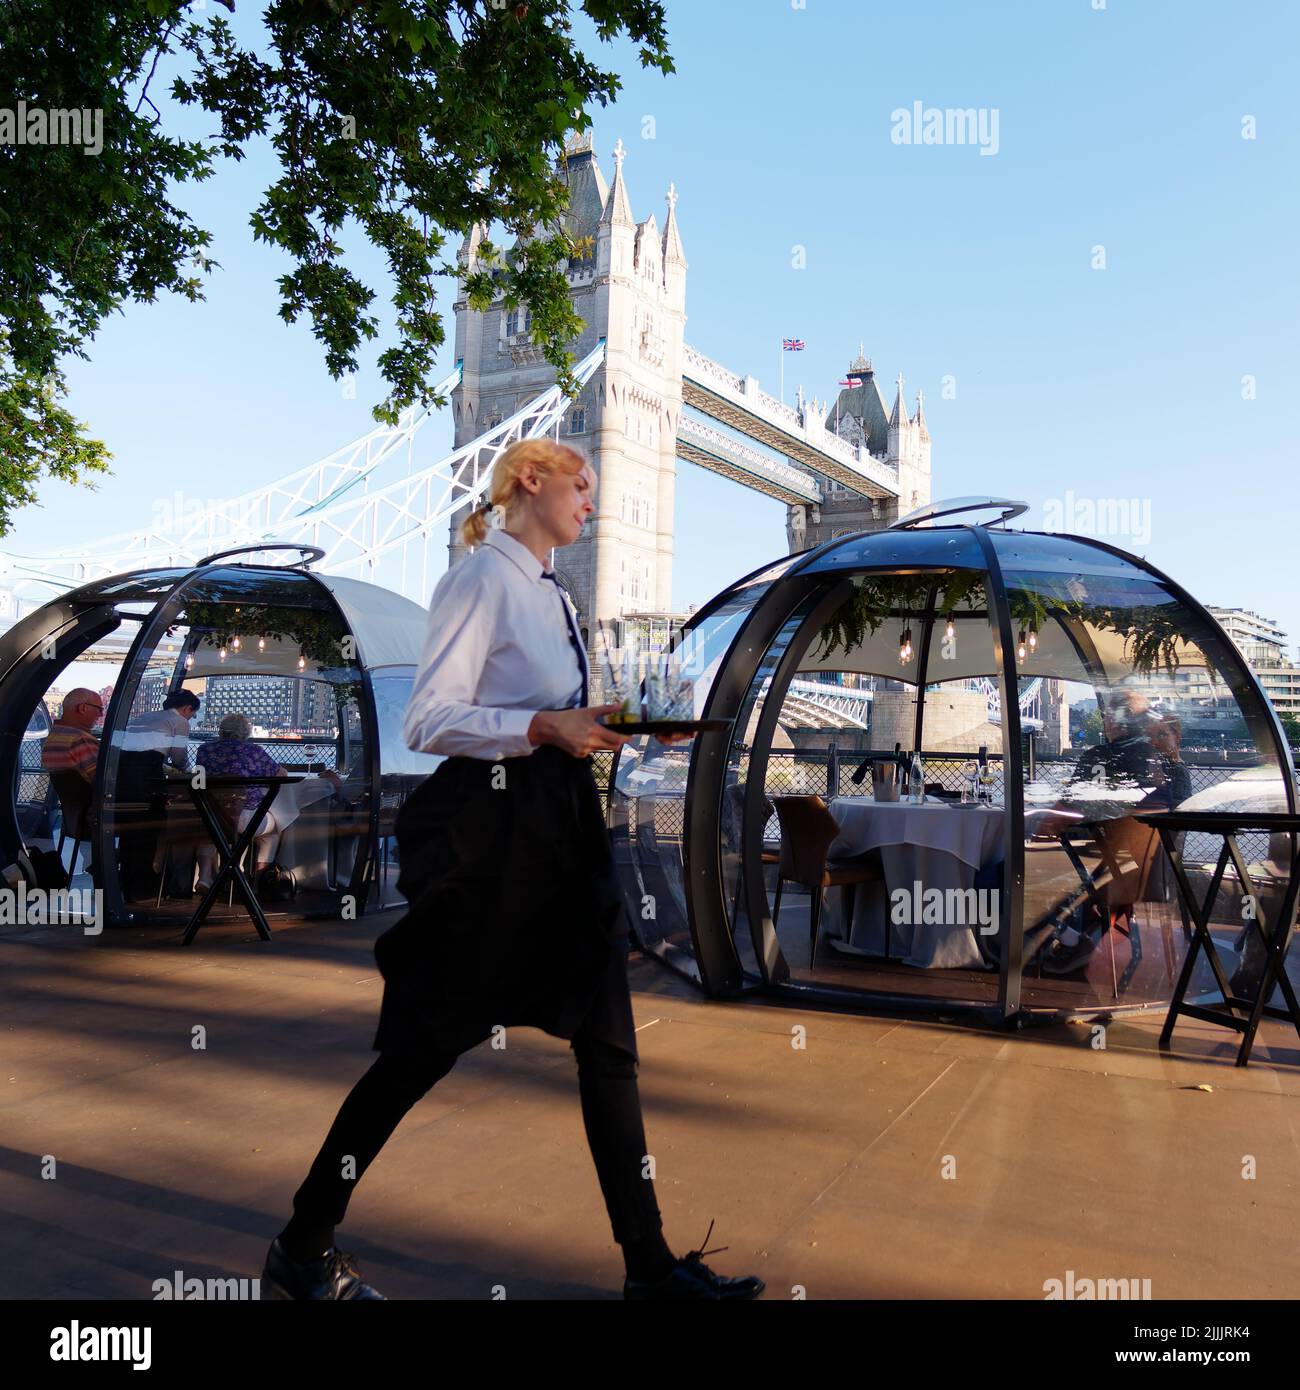 London, Greater London, England, June 22 2022: Waitress in uniform carries a tray of drinks at the Glass Rooms restaurant beside the River Thames with Stock Photo